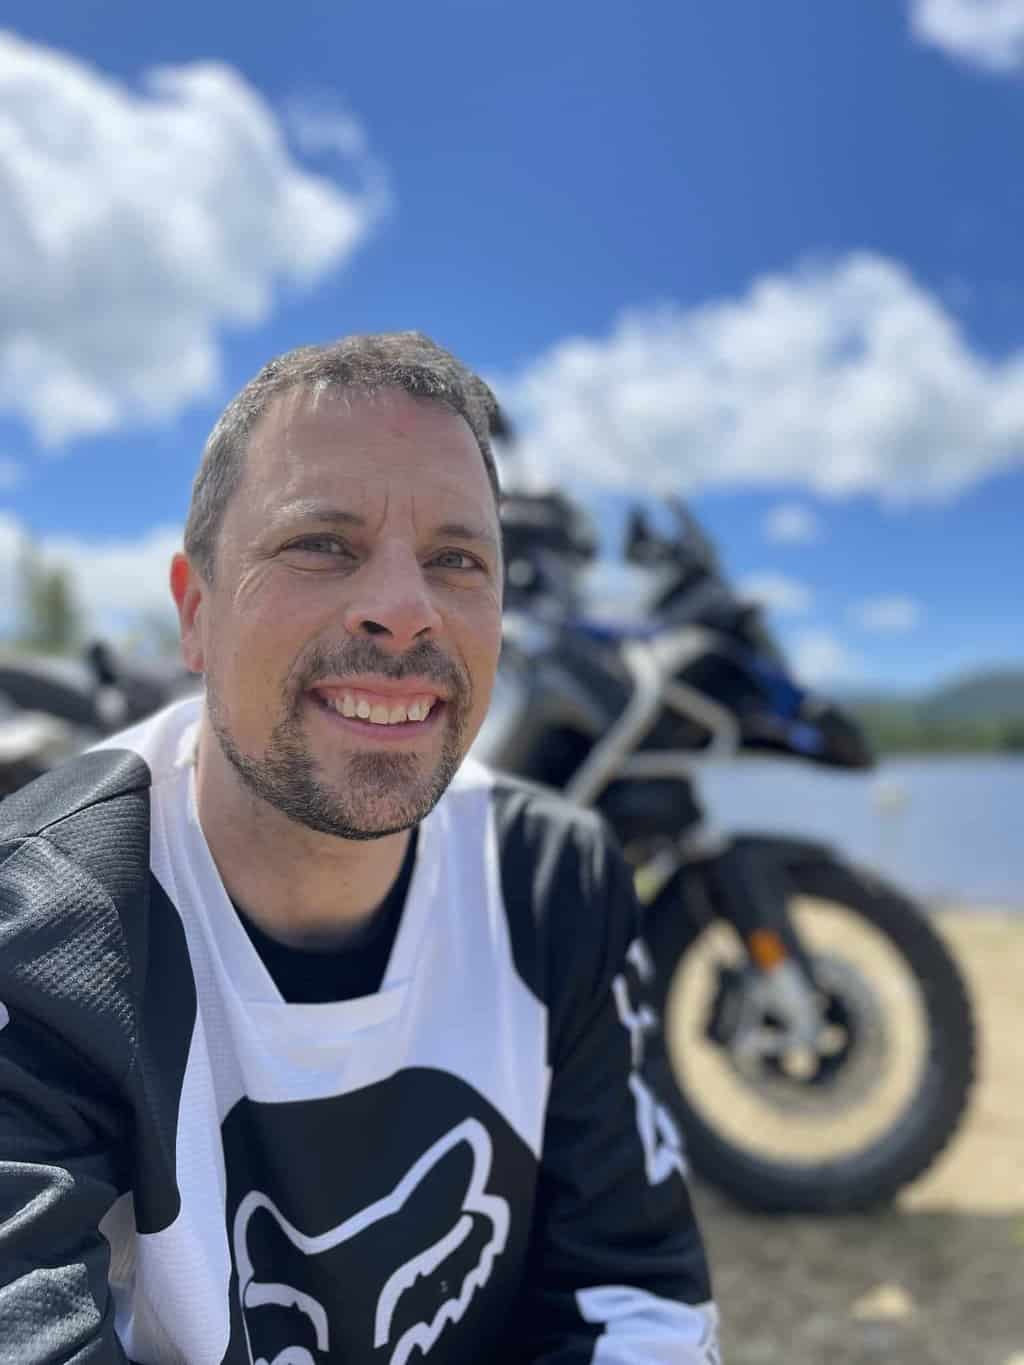 2023 BMW G 310 R: A Closer Look at the Latest Model